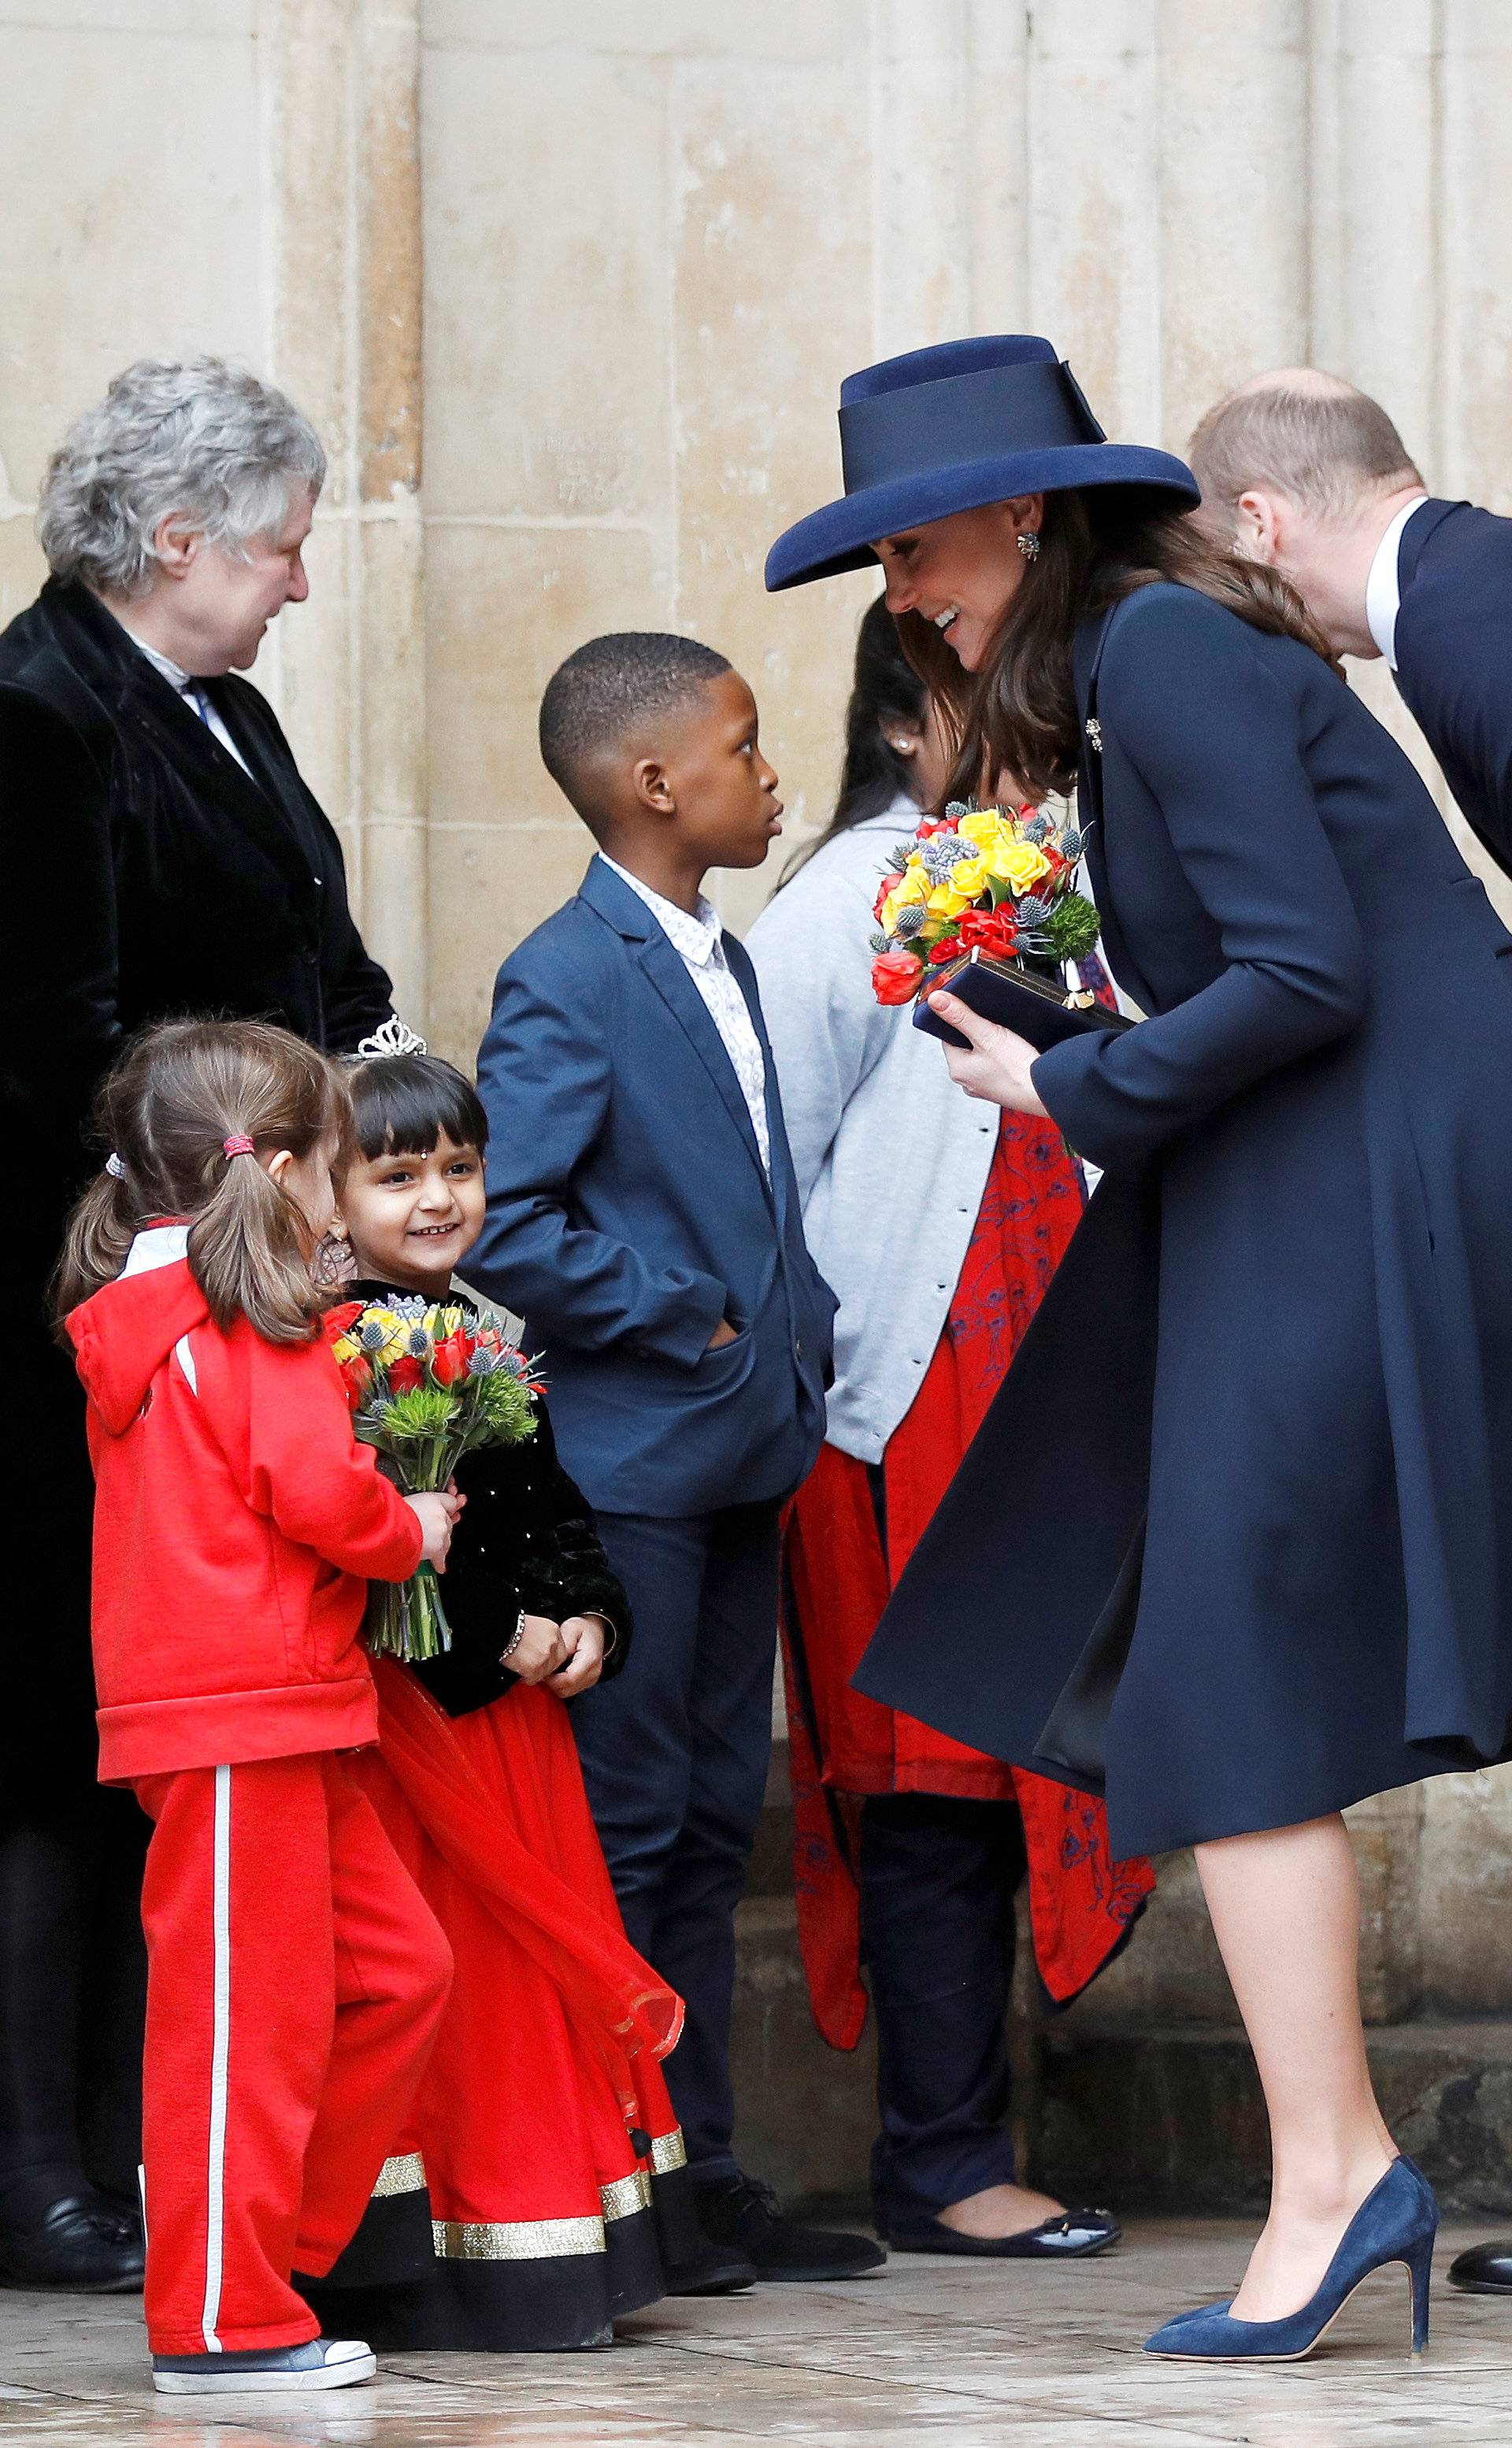 Britain's Prince William and Catherine, the Duchess of Cambridge, greet children after attending the Commonwealth Service at Westminster Abbey in London